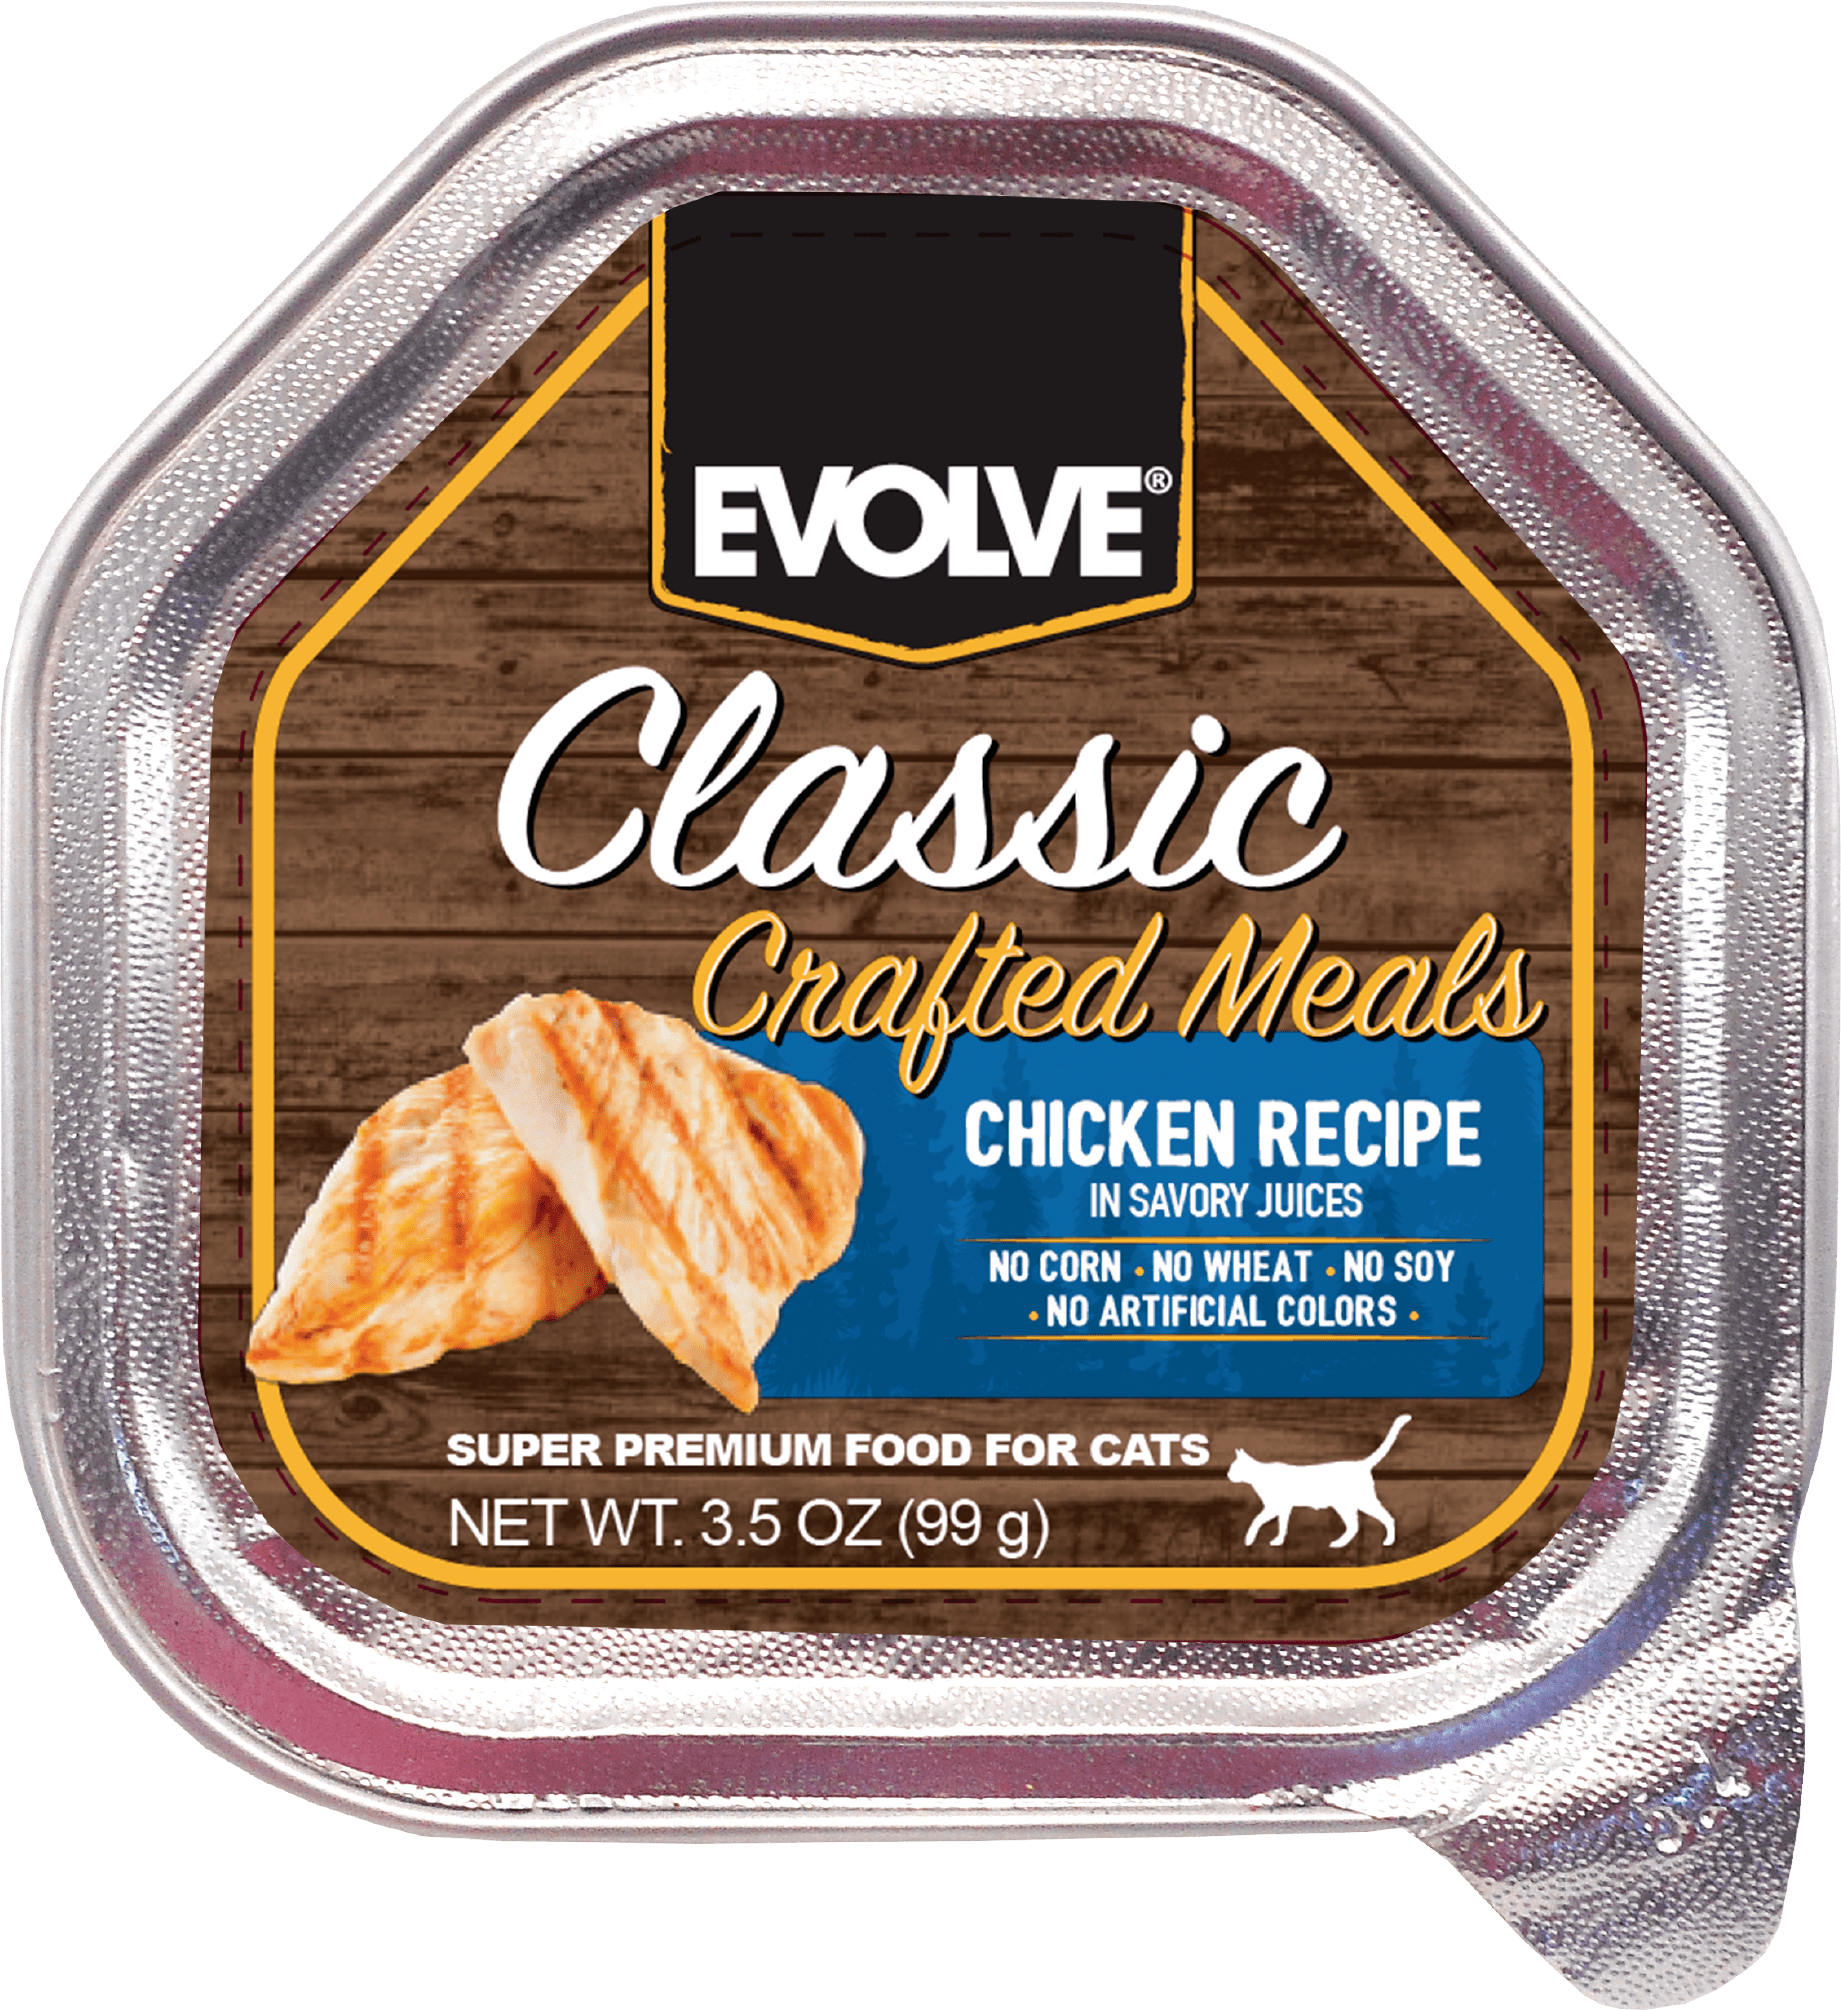 Evolve Classic Crafted Meals Chicken Recipe